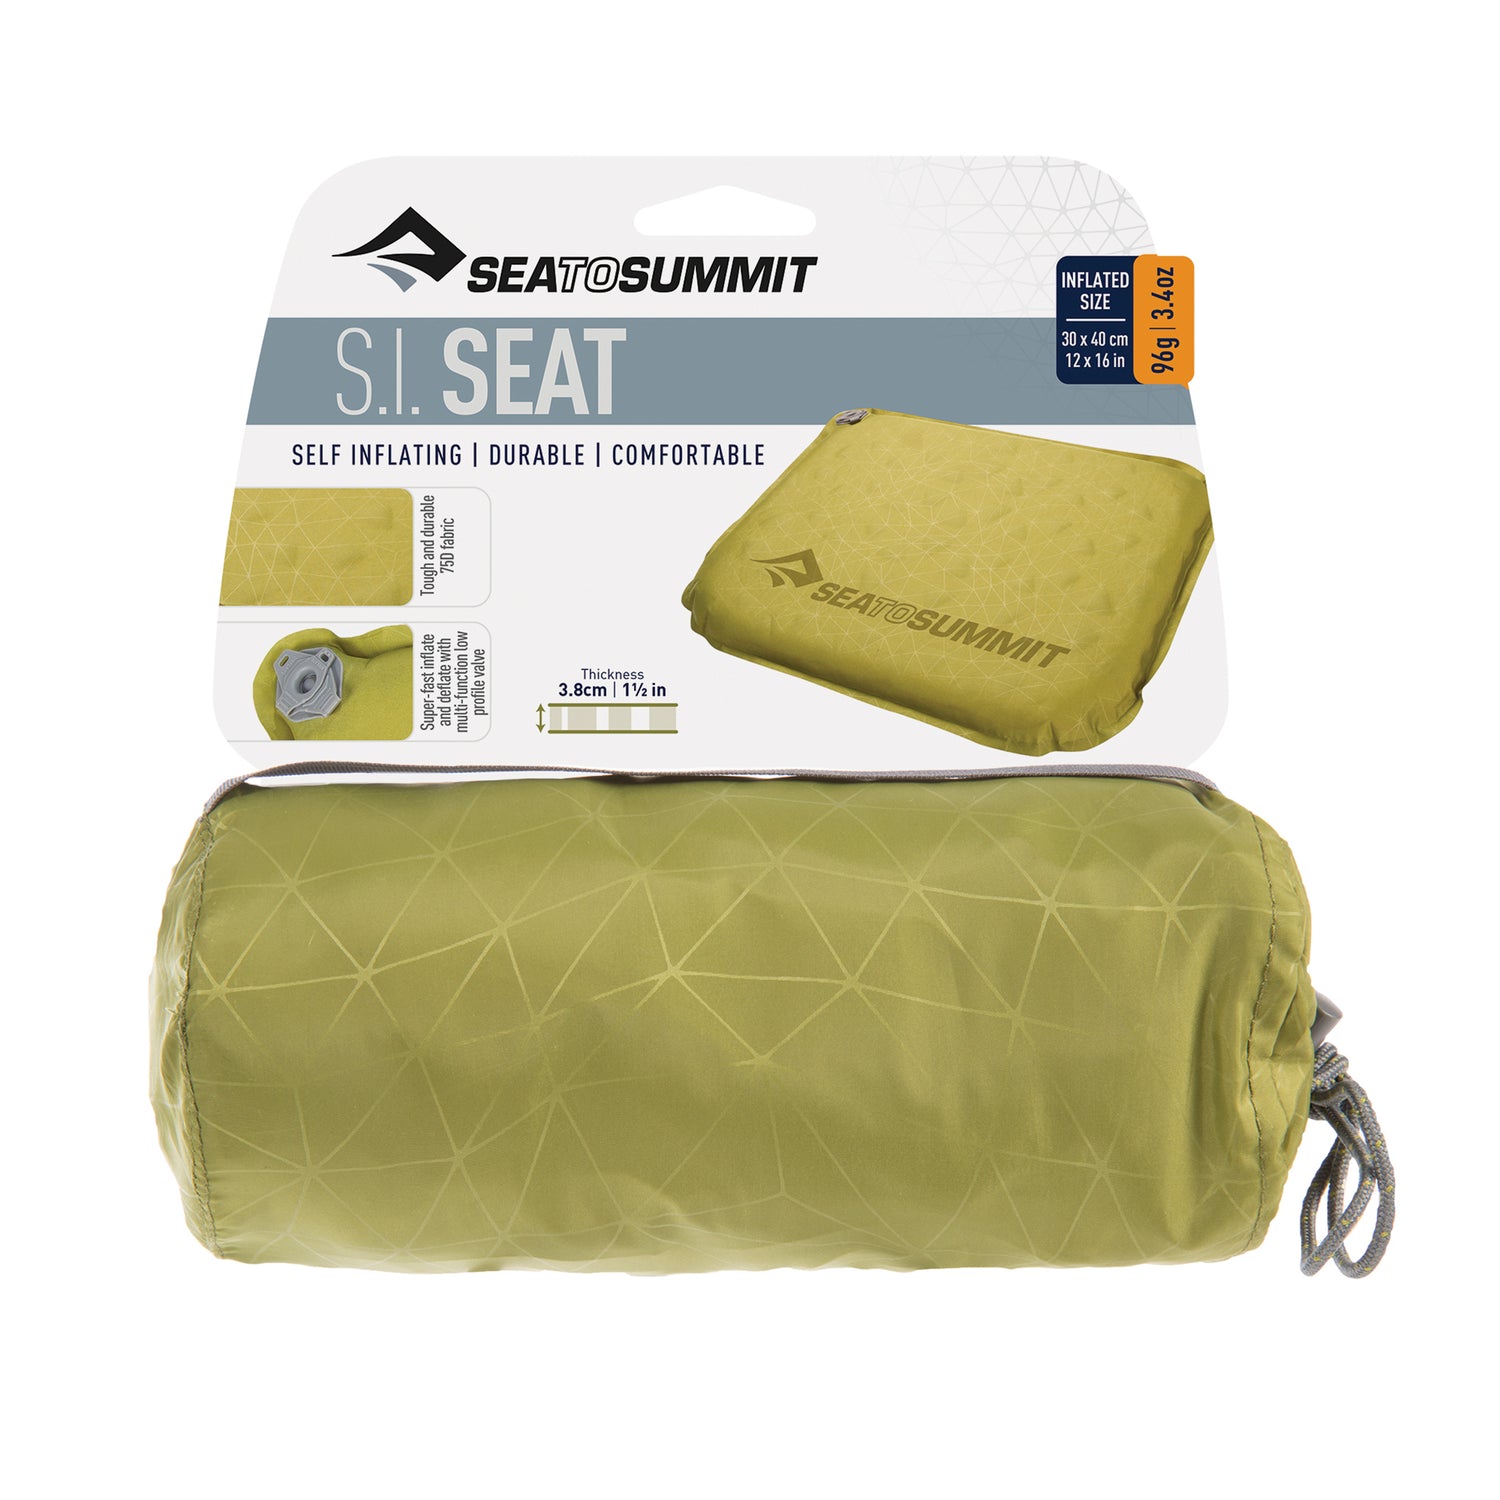 Sea to Summit Ultralight Camp Chair / Mattress Combo Review